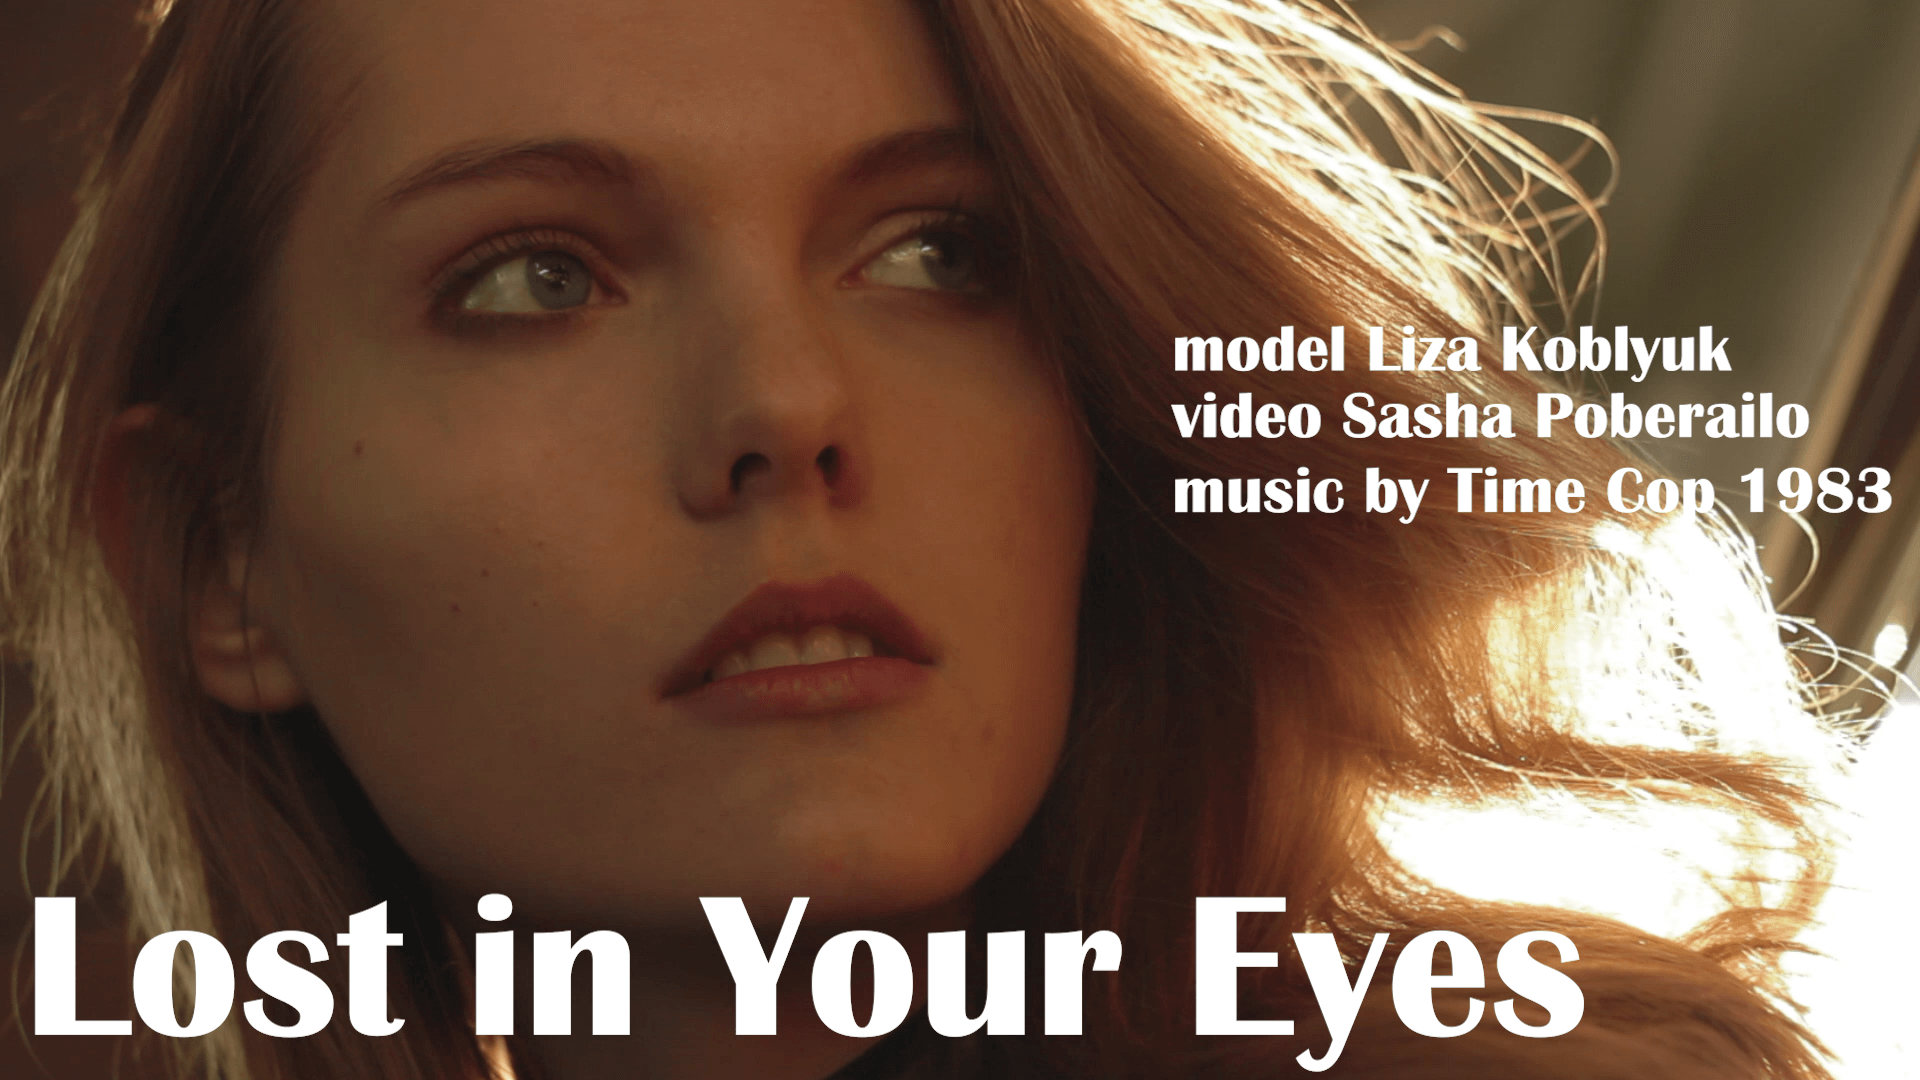 lost in your eyes - actress, fashion, french, mood, music